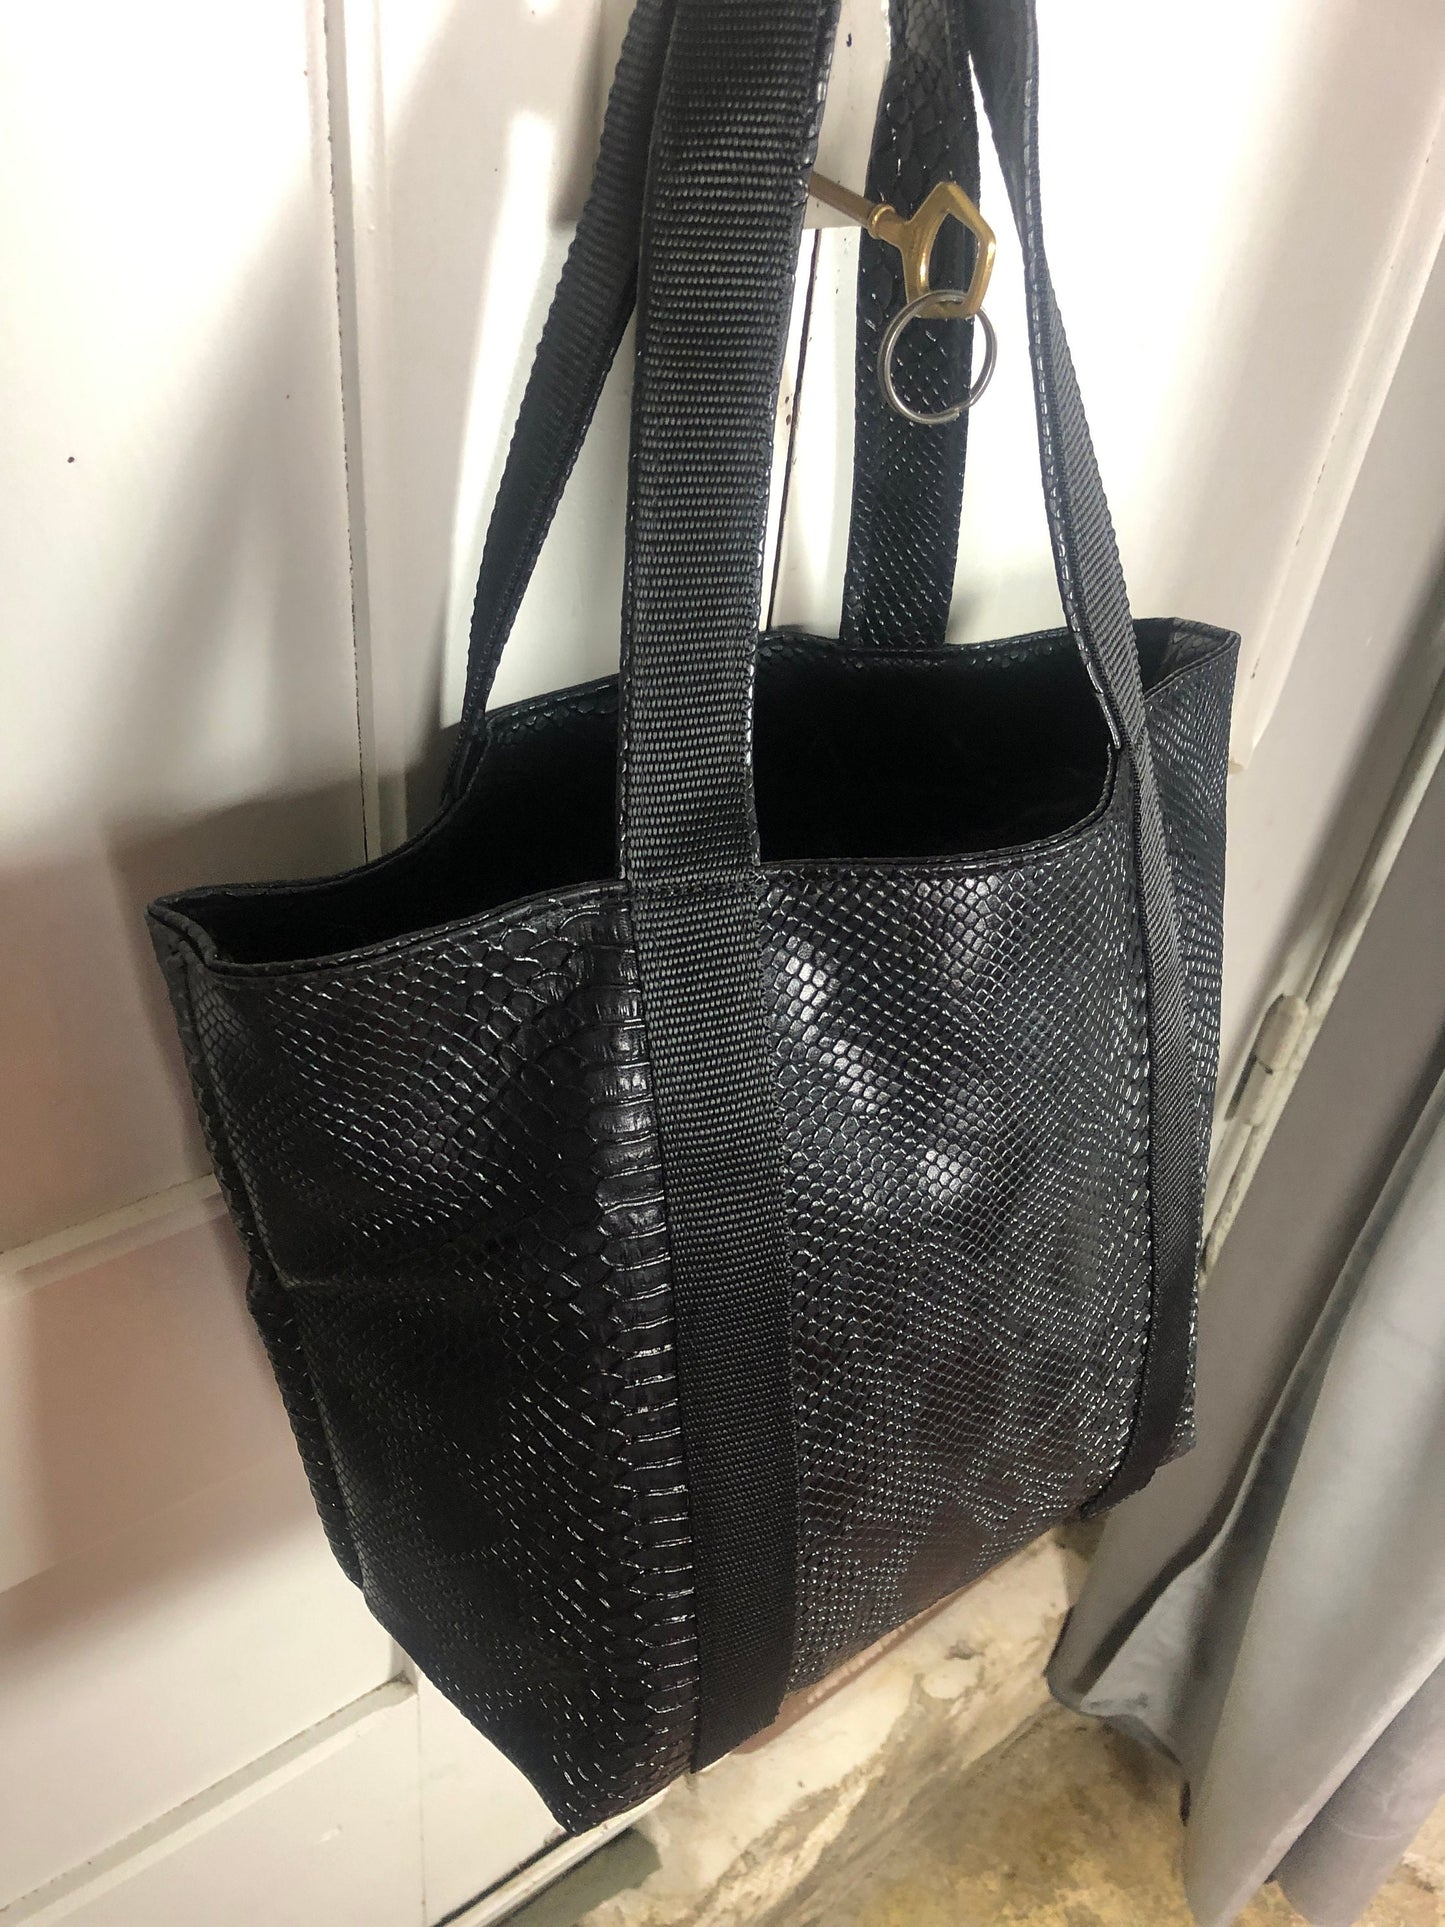 Black faux leather tote bag - faux snake leather tote bag